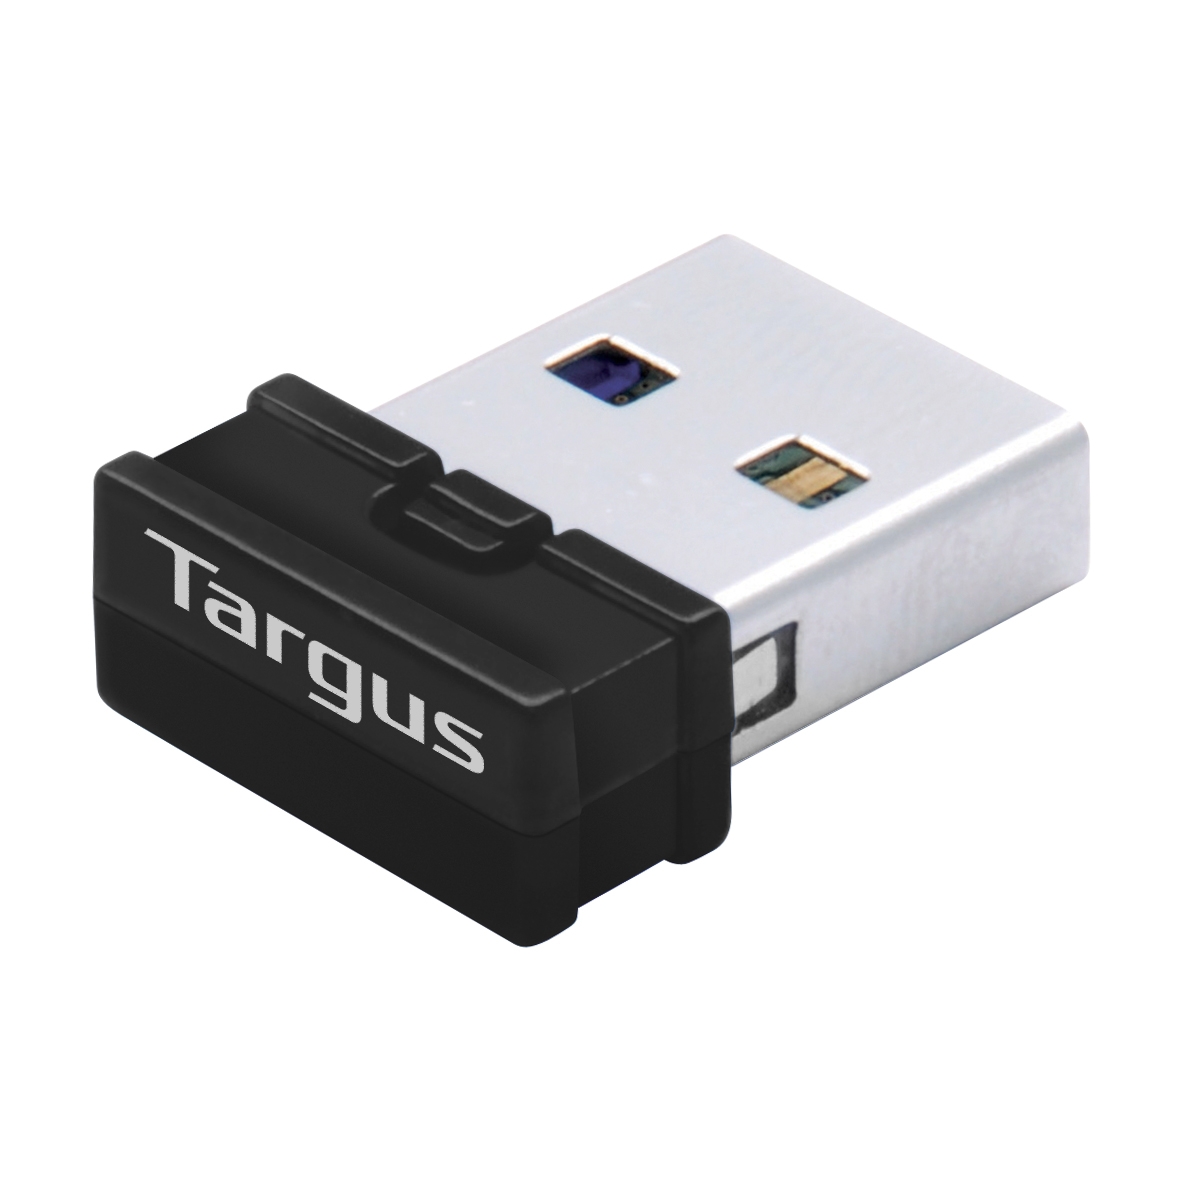 Targus Bluetooth® 4.0 Micro USB Adapter for Laptops